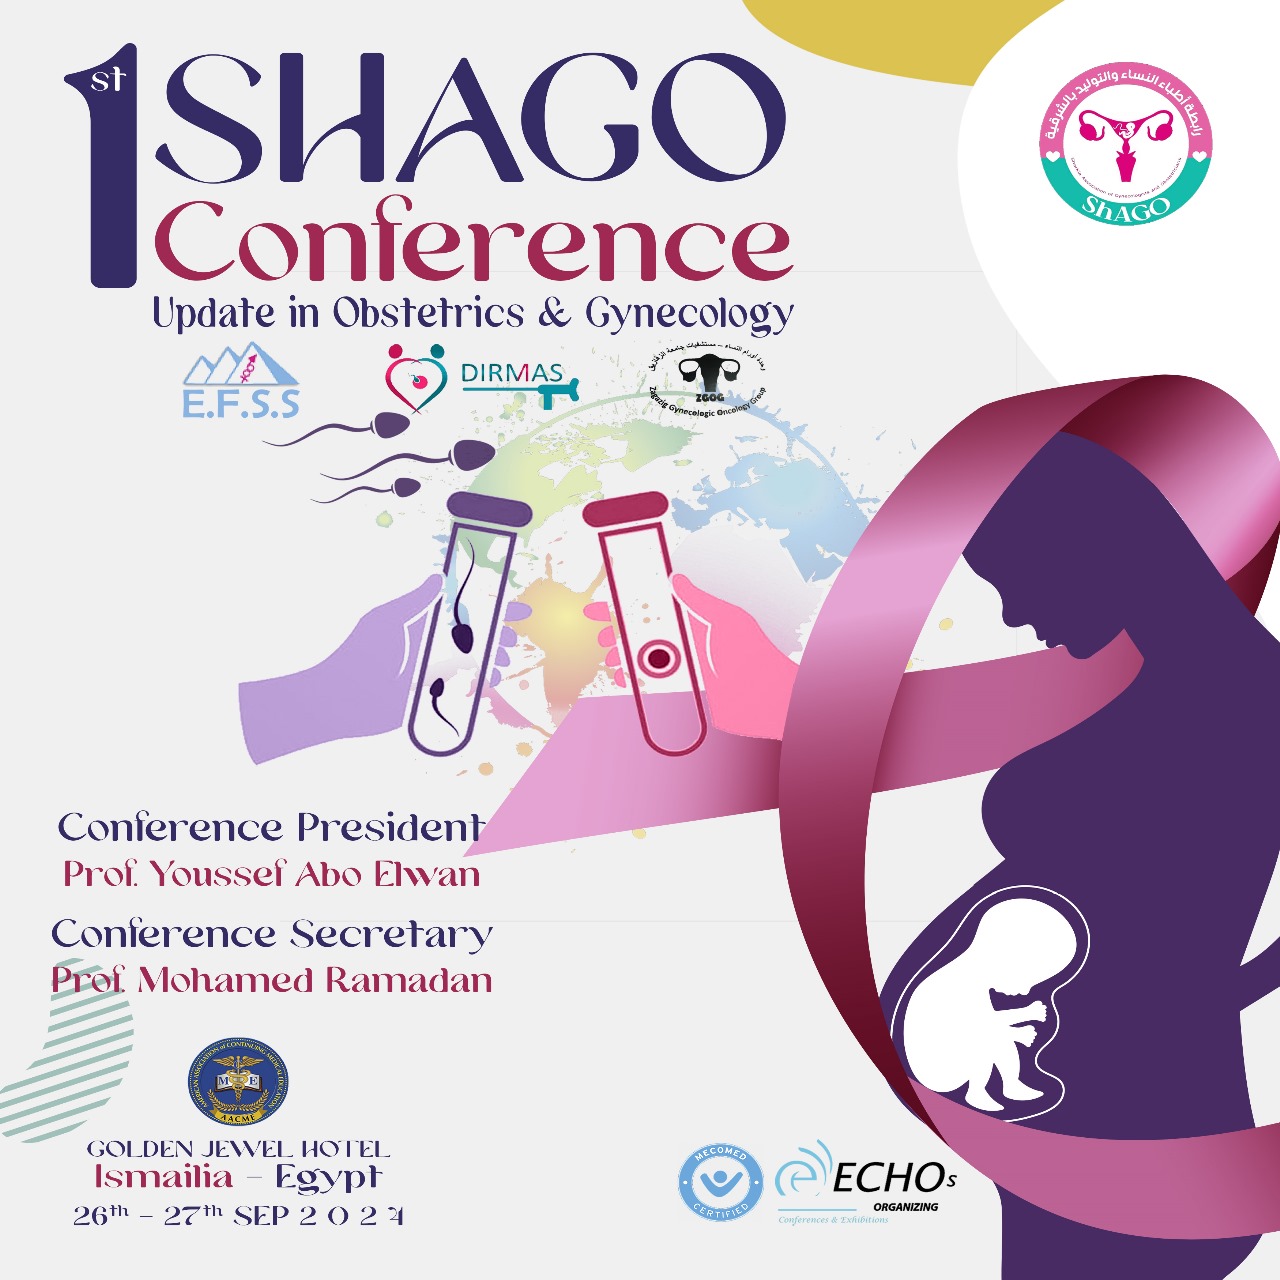 1 SHAGO CONFERENCE UPDATE IN OBSTETRICS & GYNECOLOGY